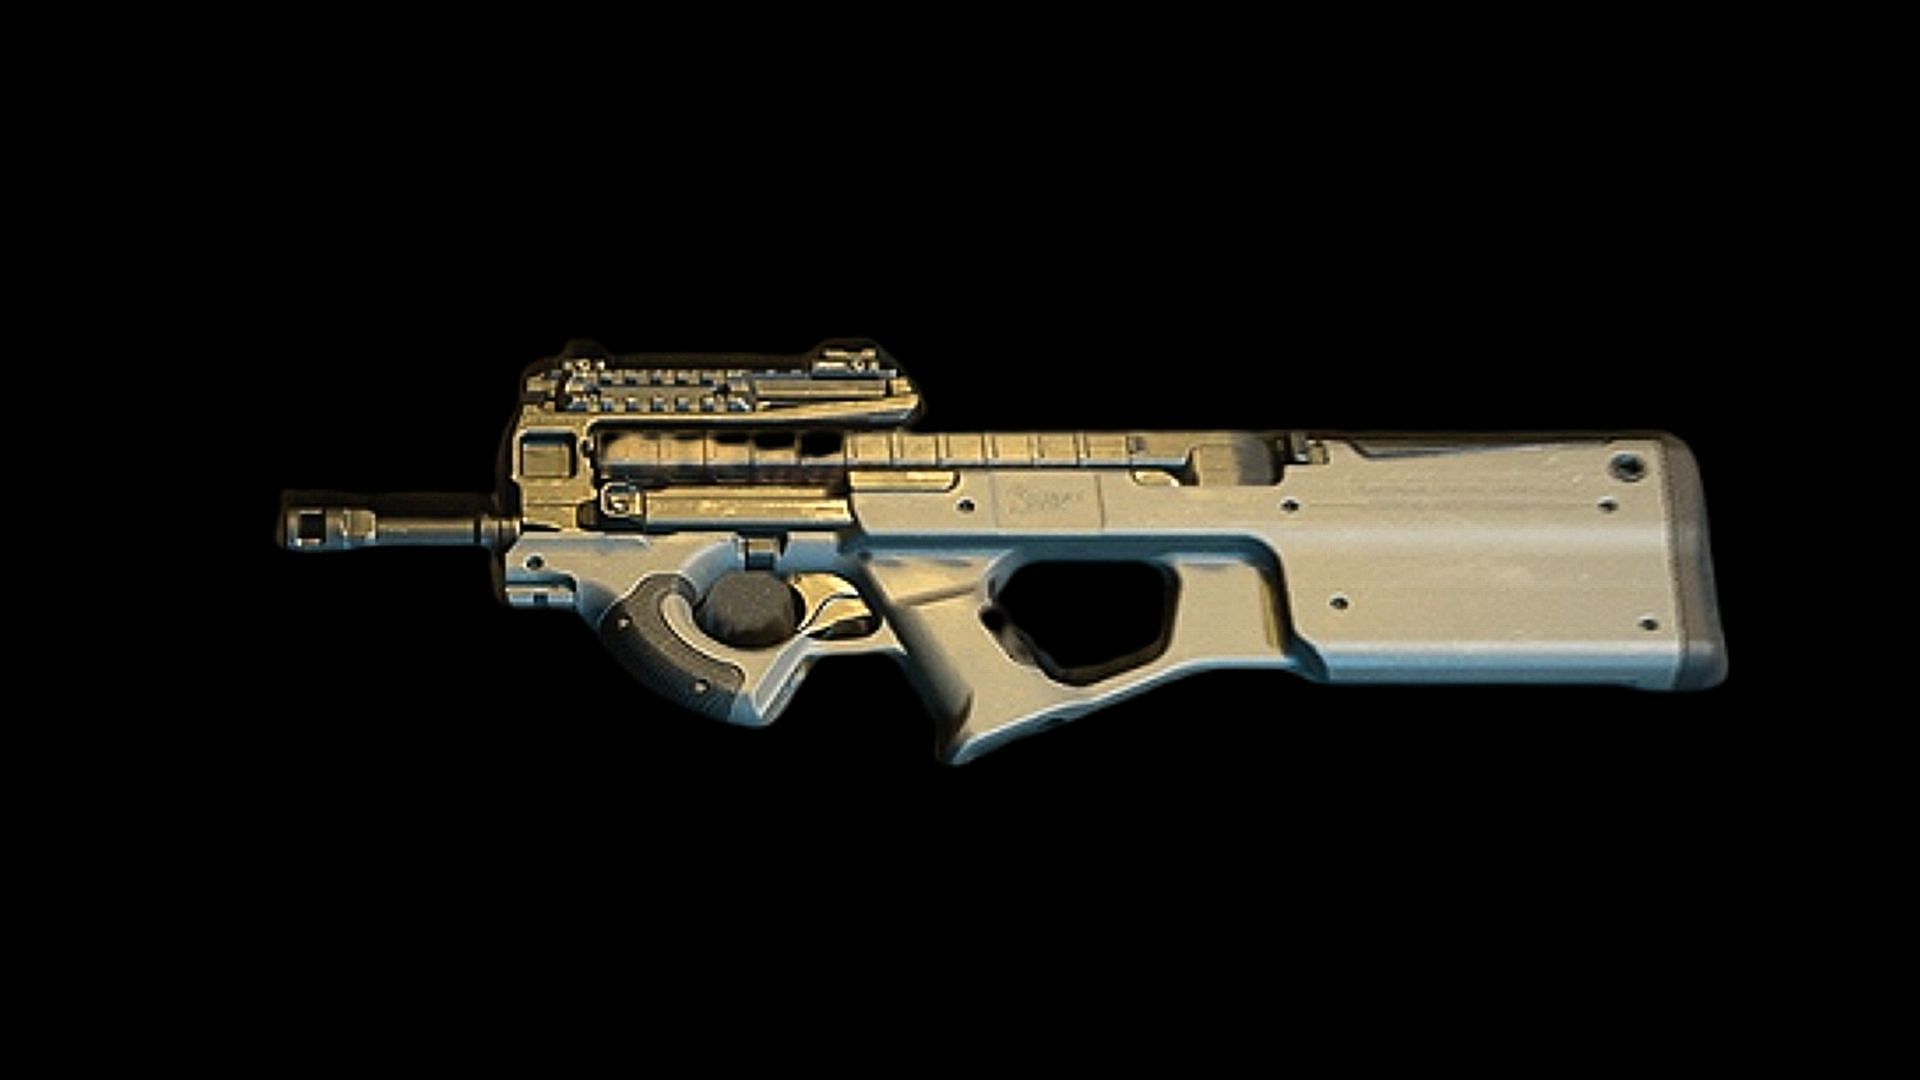 The PDSW 528 SMG in Modern Warfare 2 (Image via Activision)